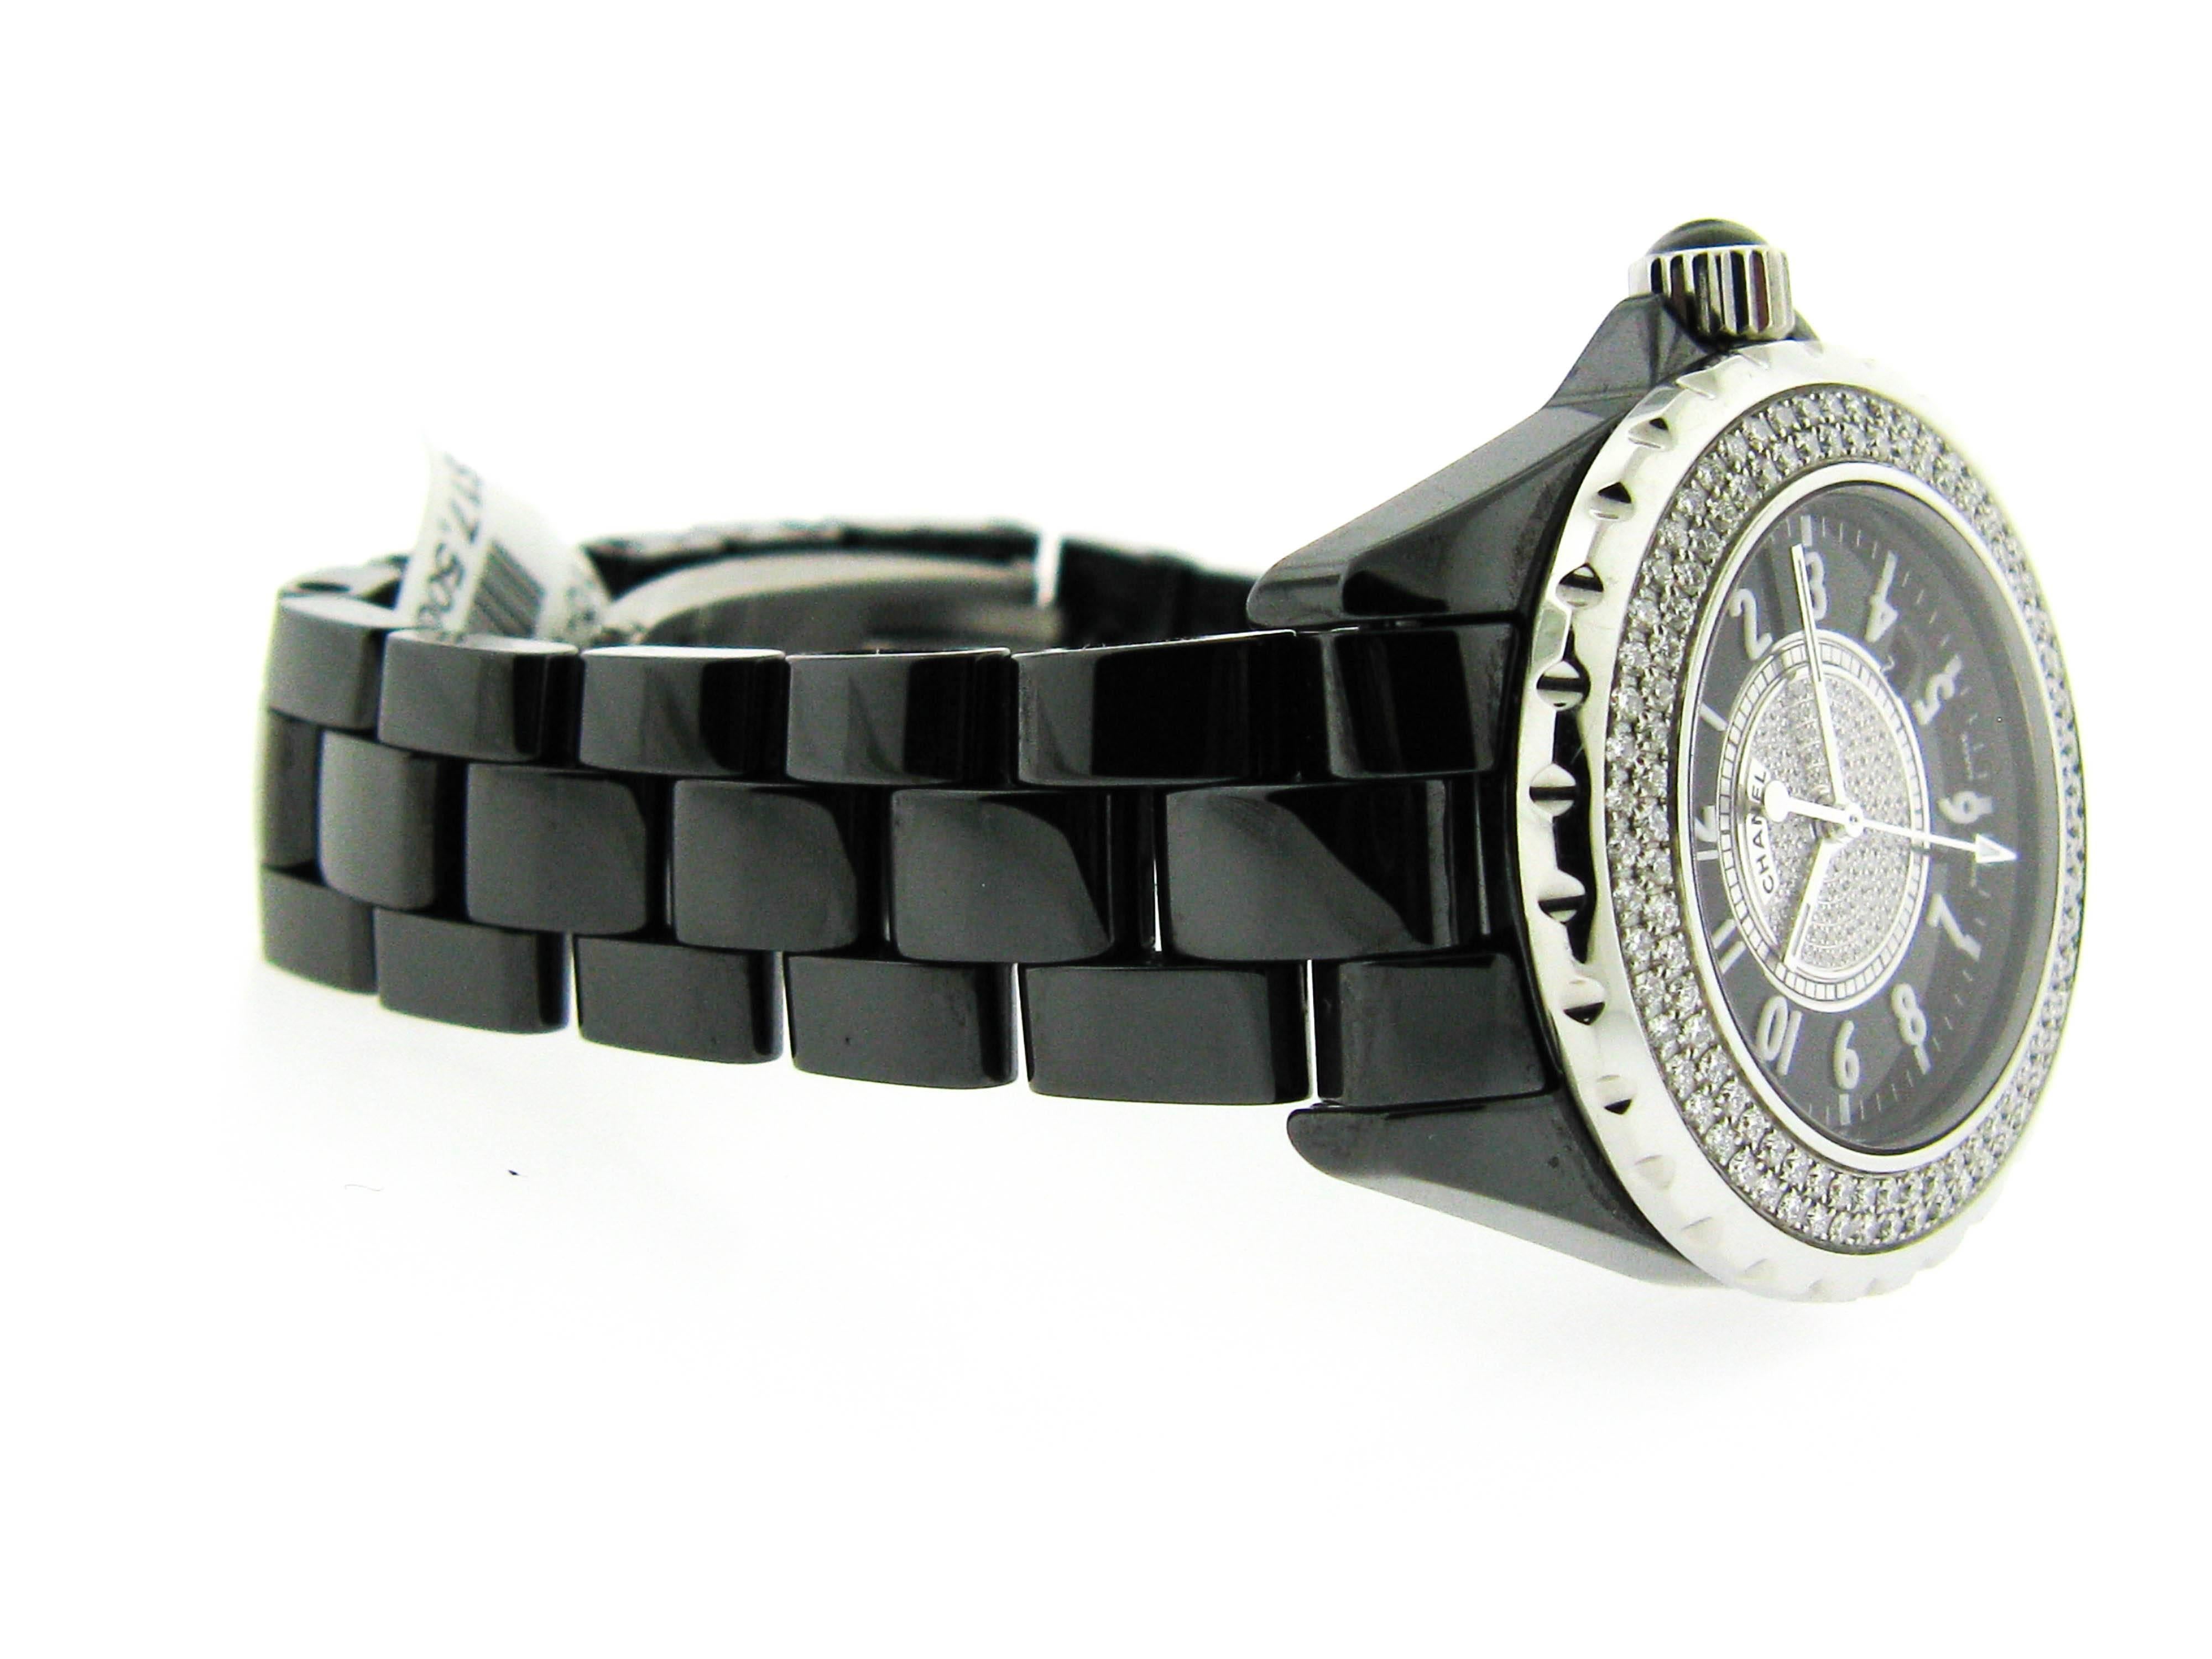 This elegant and chic watch by Chanel is the perfect statement for day-to-night wear. Black, slightly metallic ceramic band in a bracelet design. The 